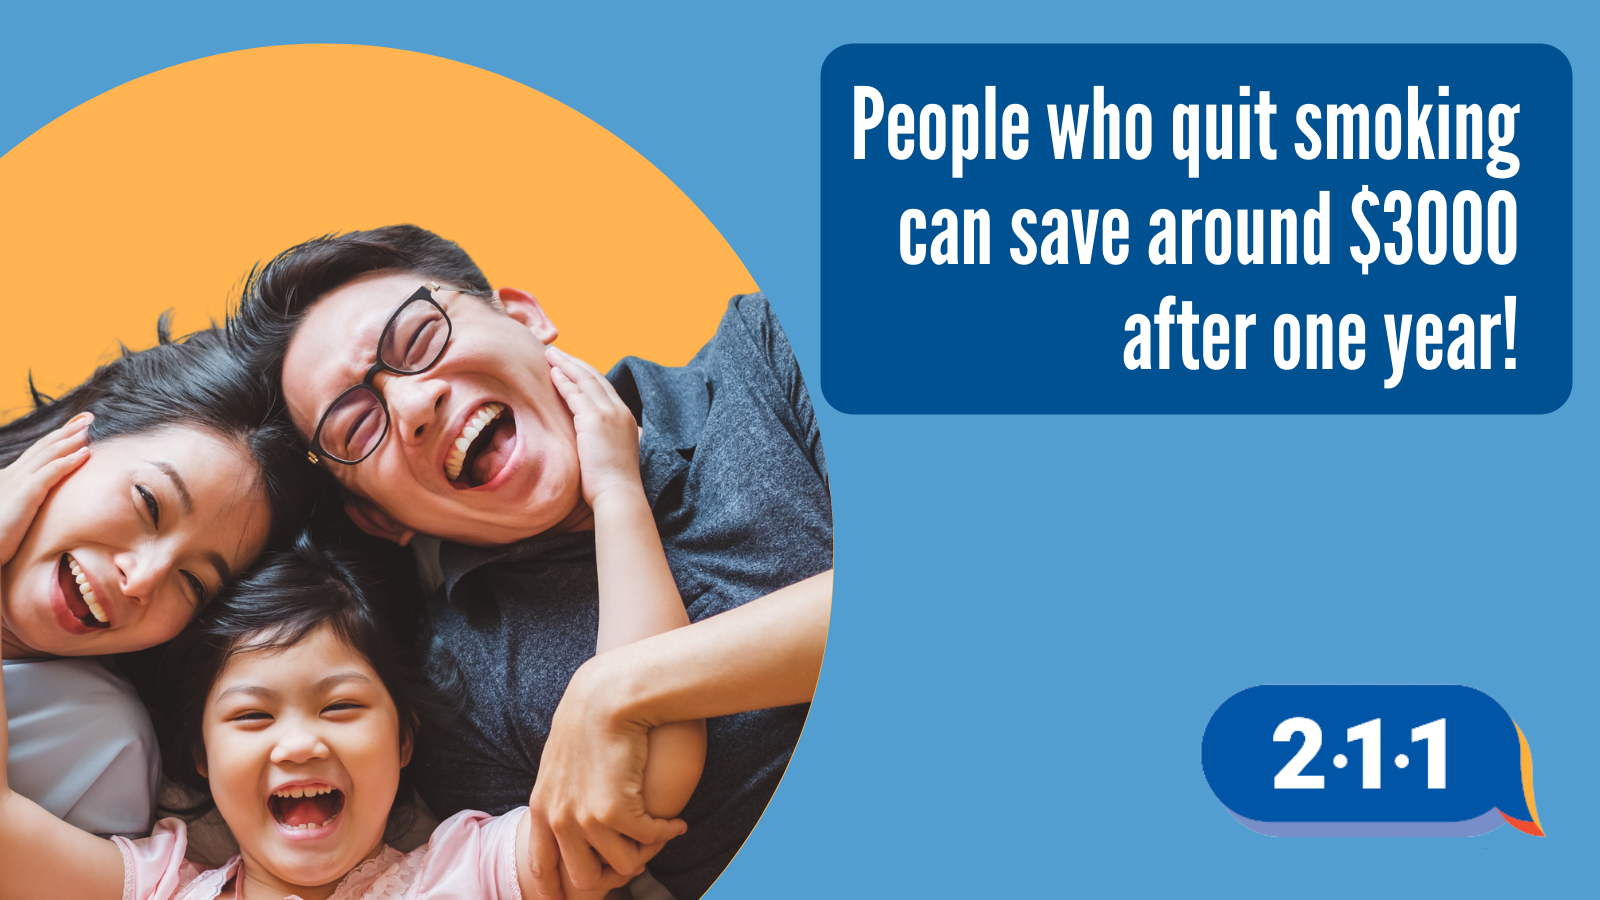 Asian smiling family and text: People who quit smoking can save around $3000 after one year! 2-1-1